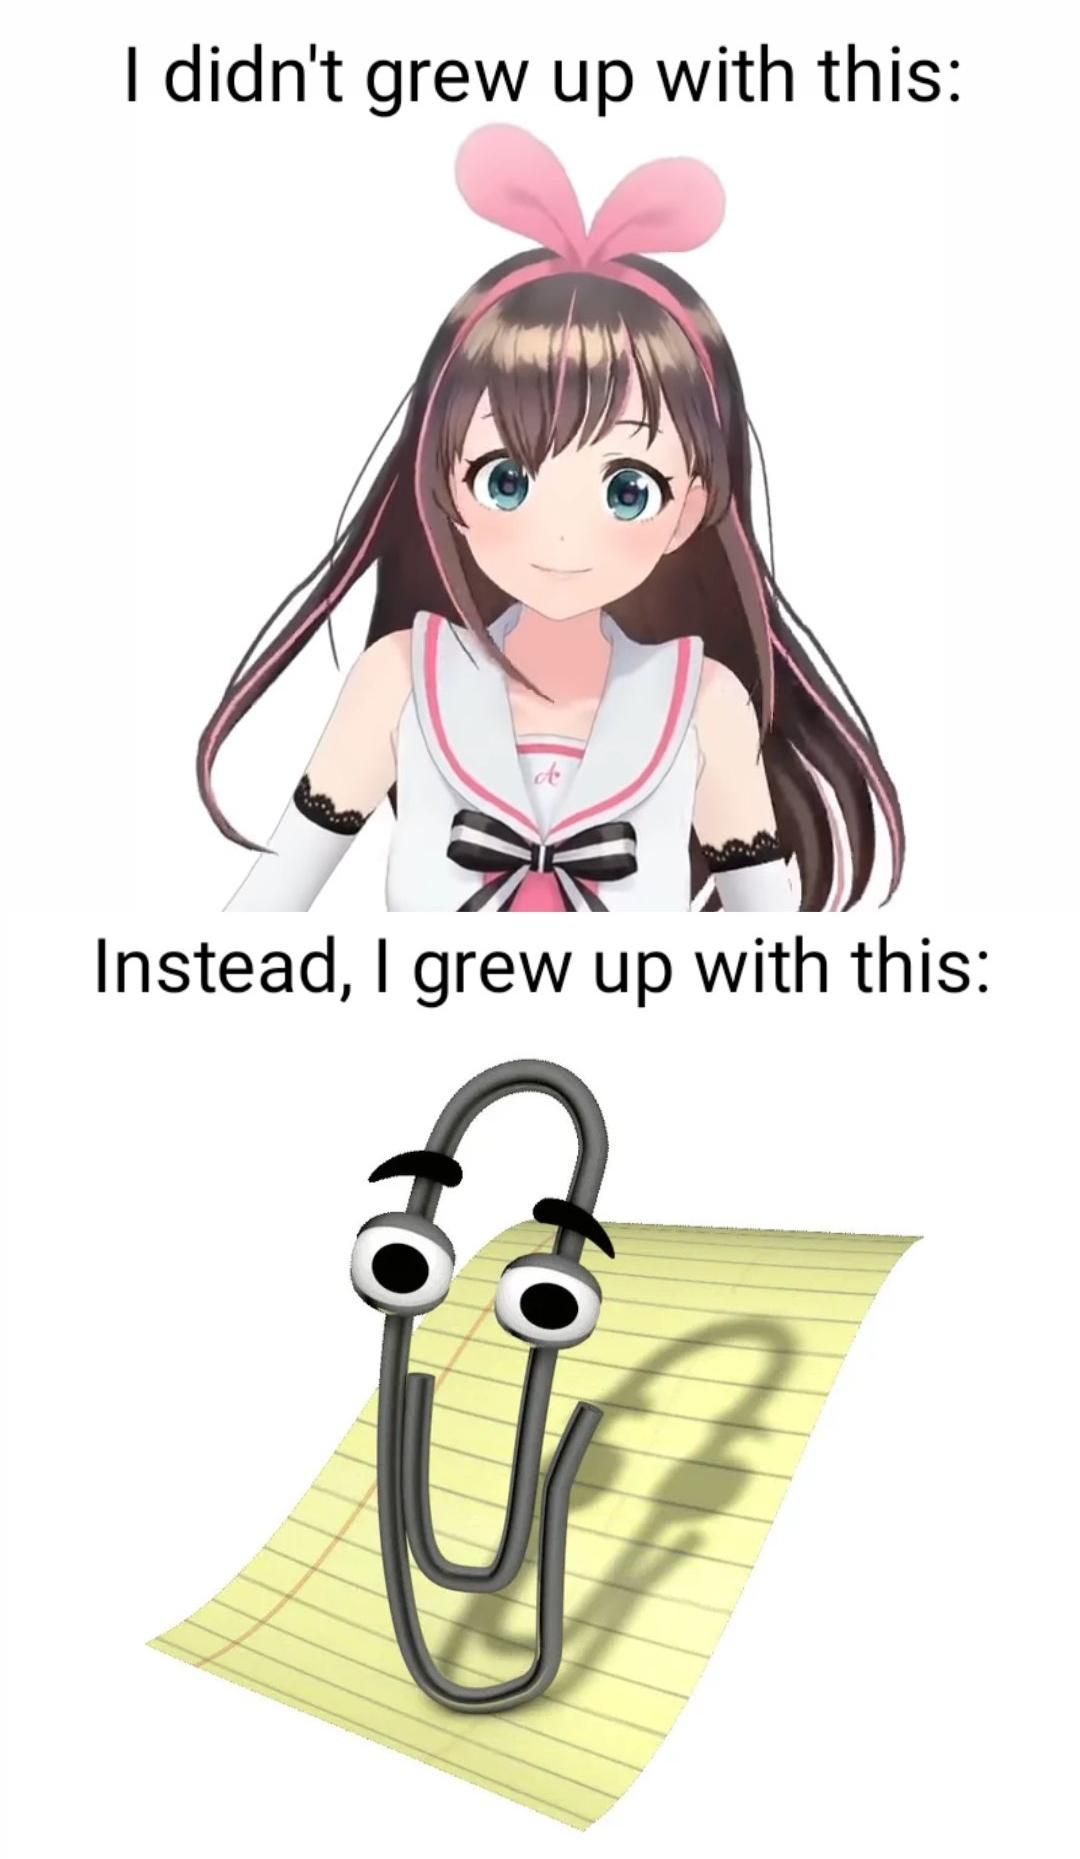 Sorry fam, but Clippy was the first Vtuber model